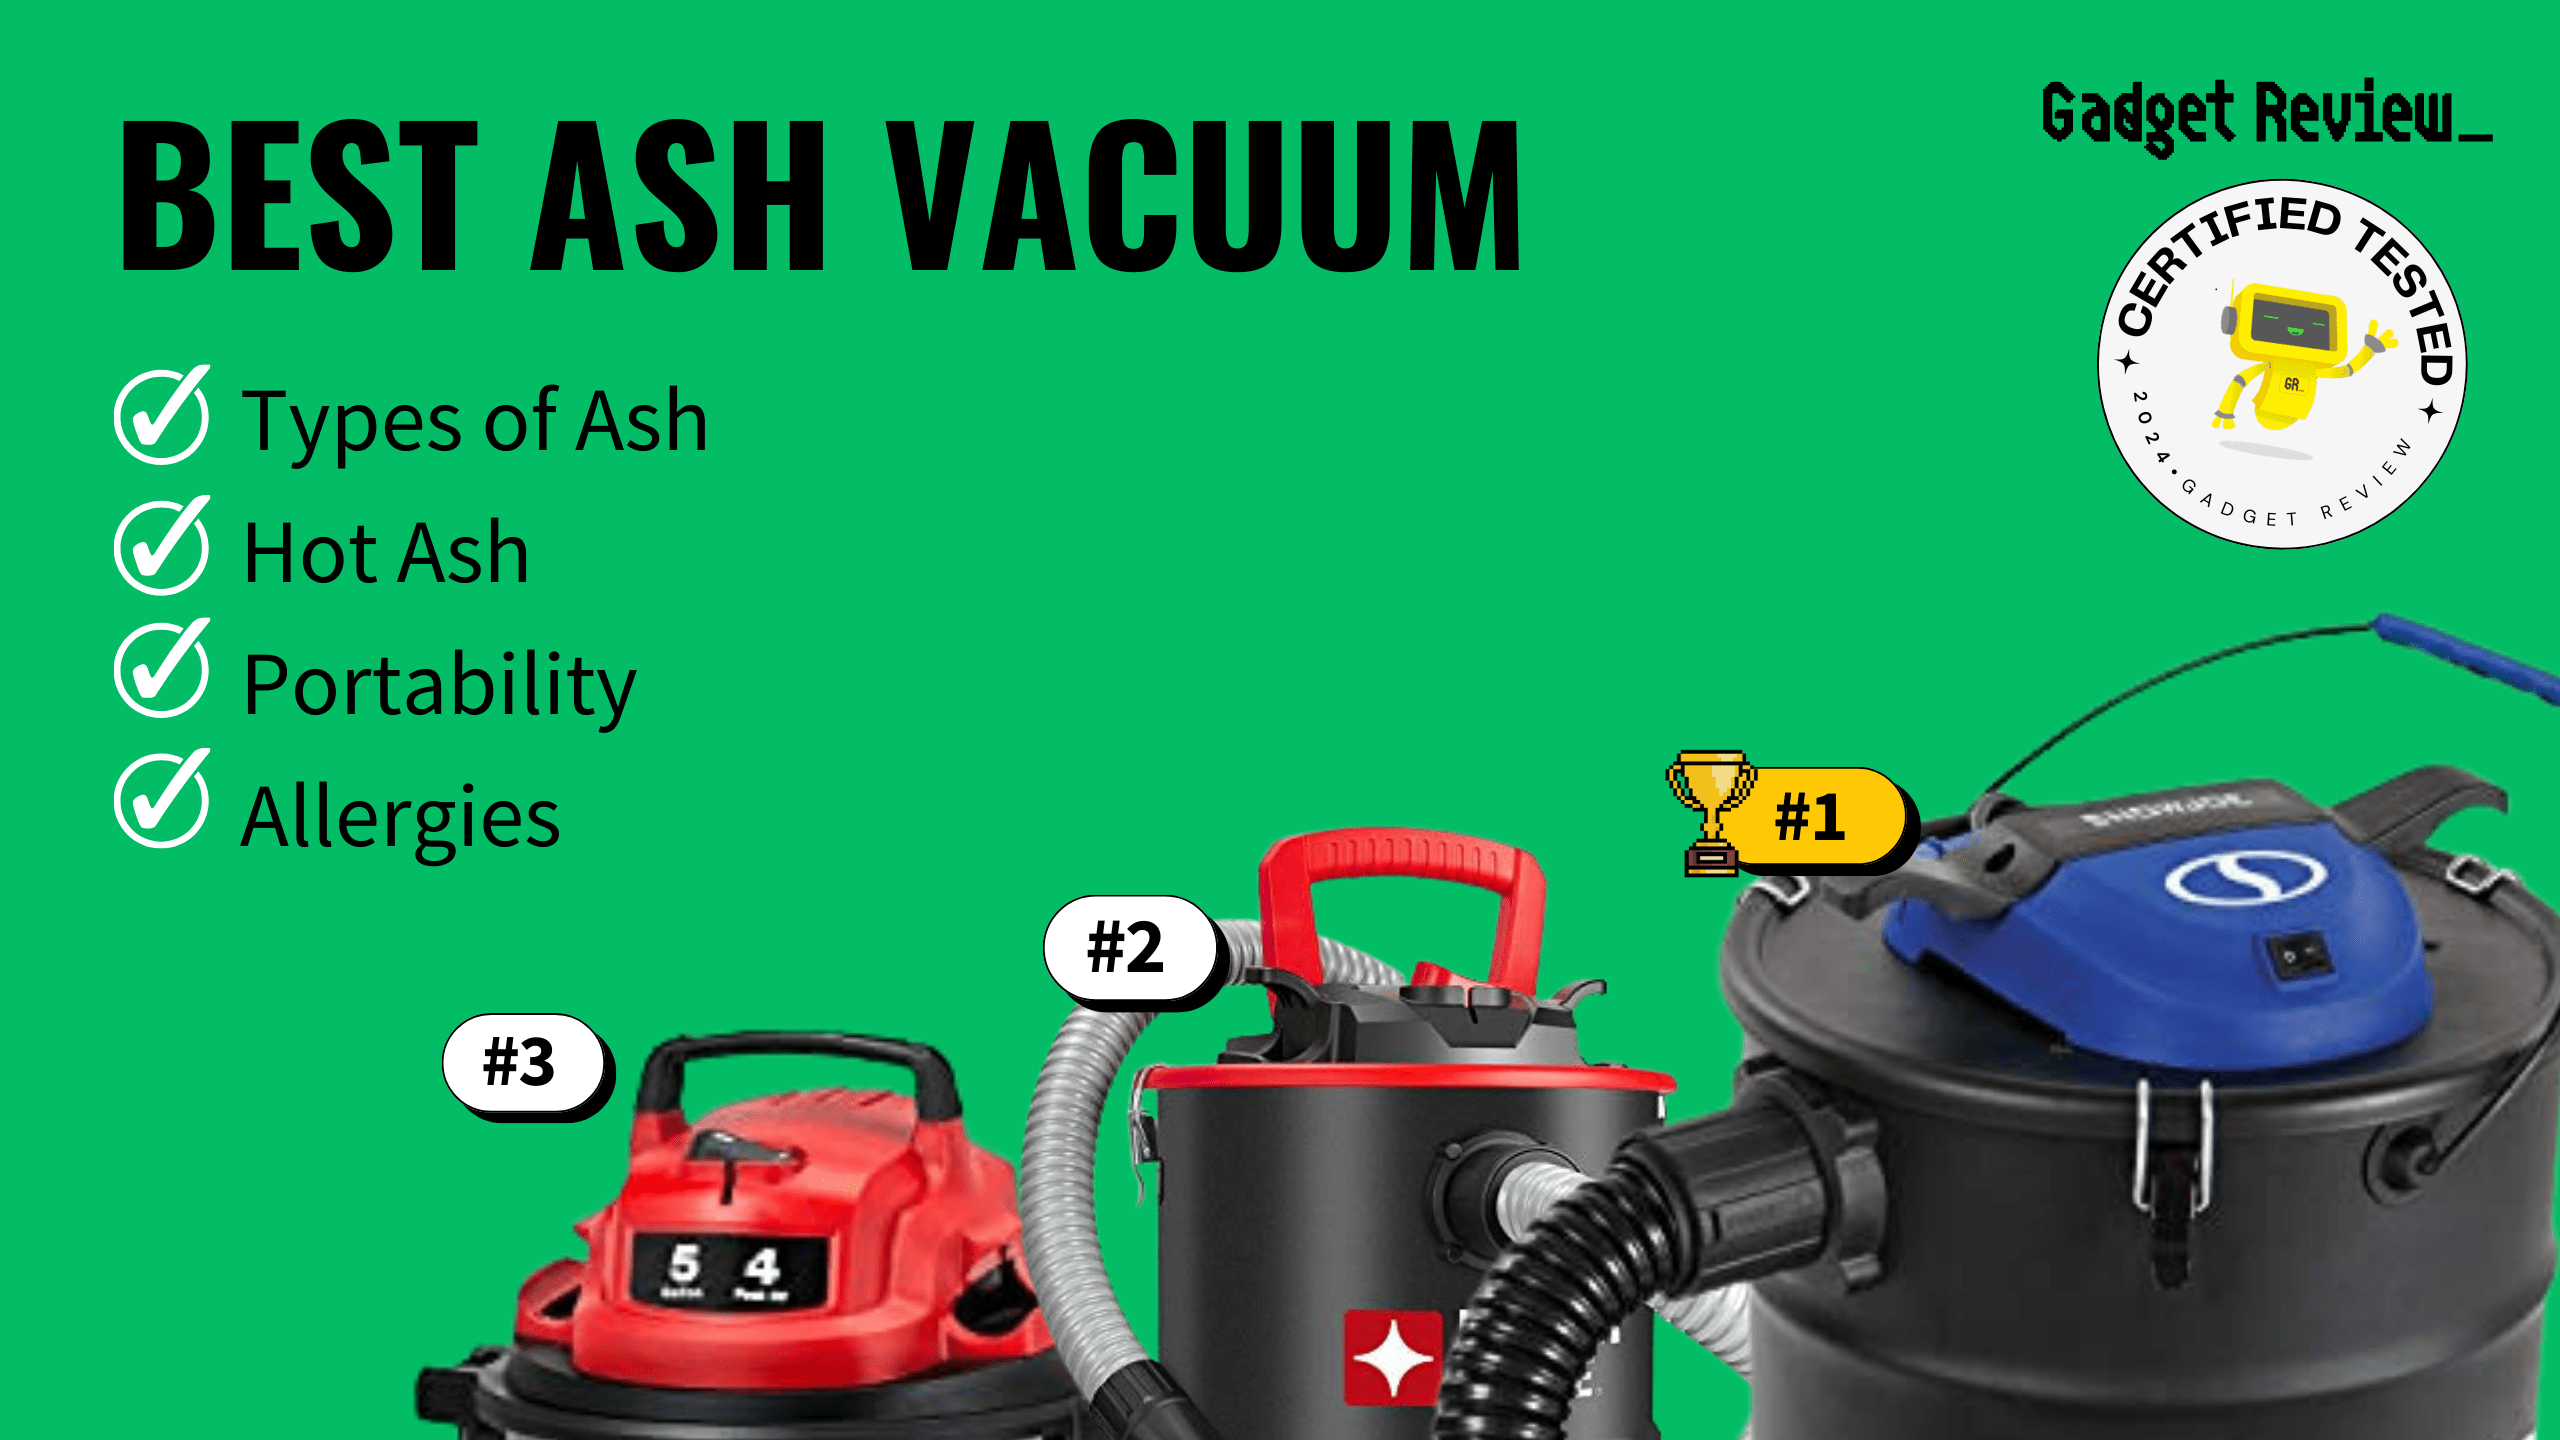 best ash vacuum guide that shows the top best vacuum cleaner model